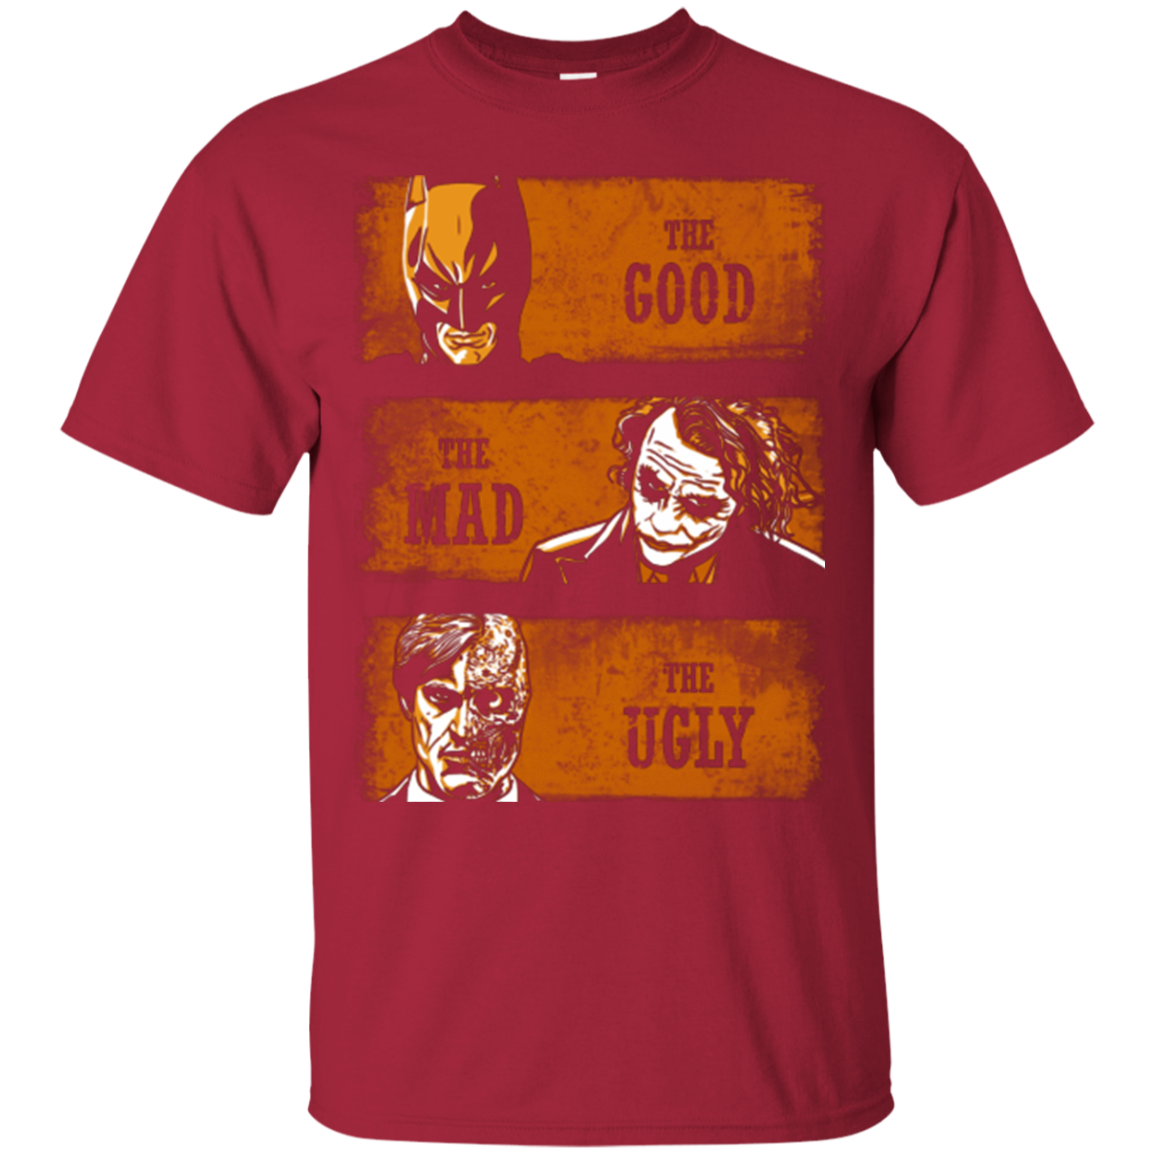 The Good the Mad and the Ugly2 T-Shirt